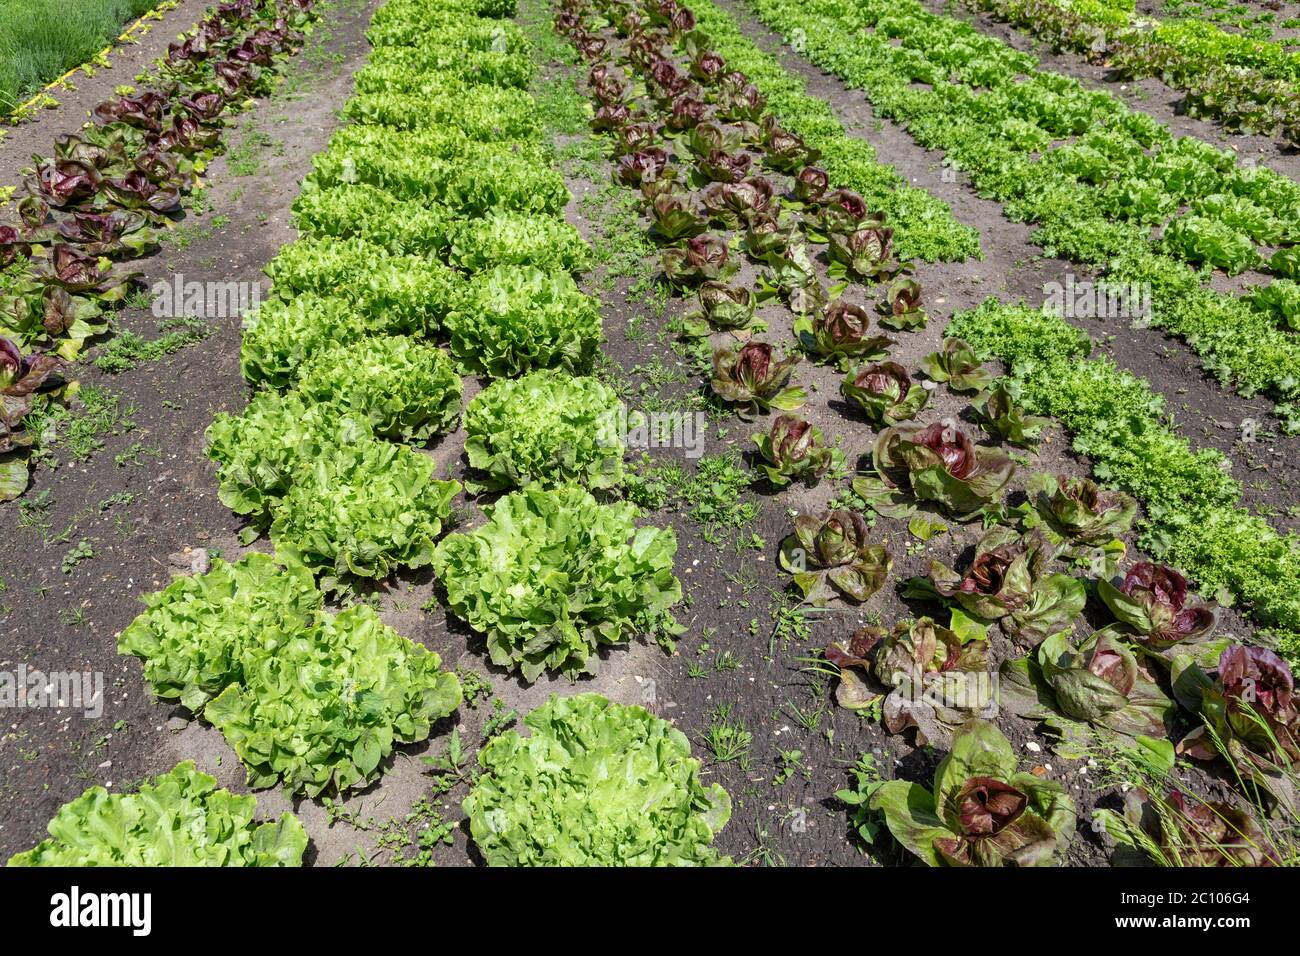 Vegetable garden with rows of different kinds of lettuce like endive and red leaf lettuce ready for harvest Stock Photo